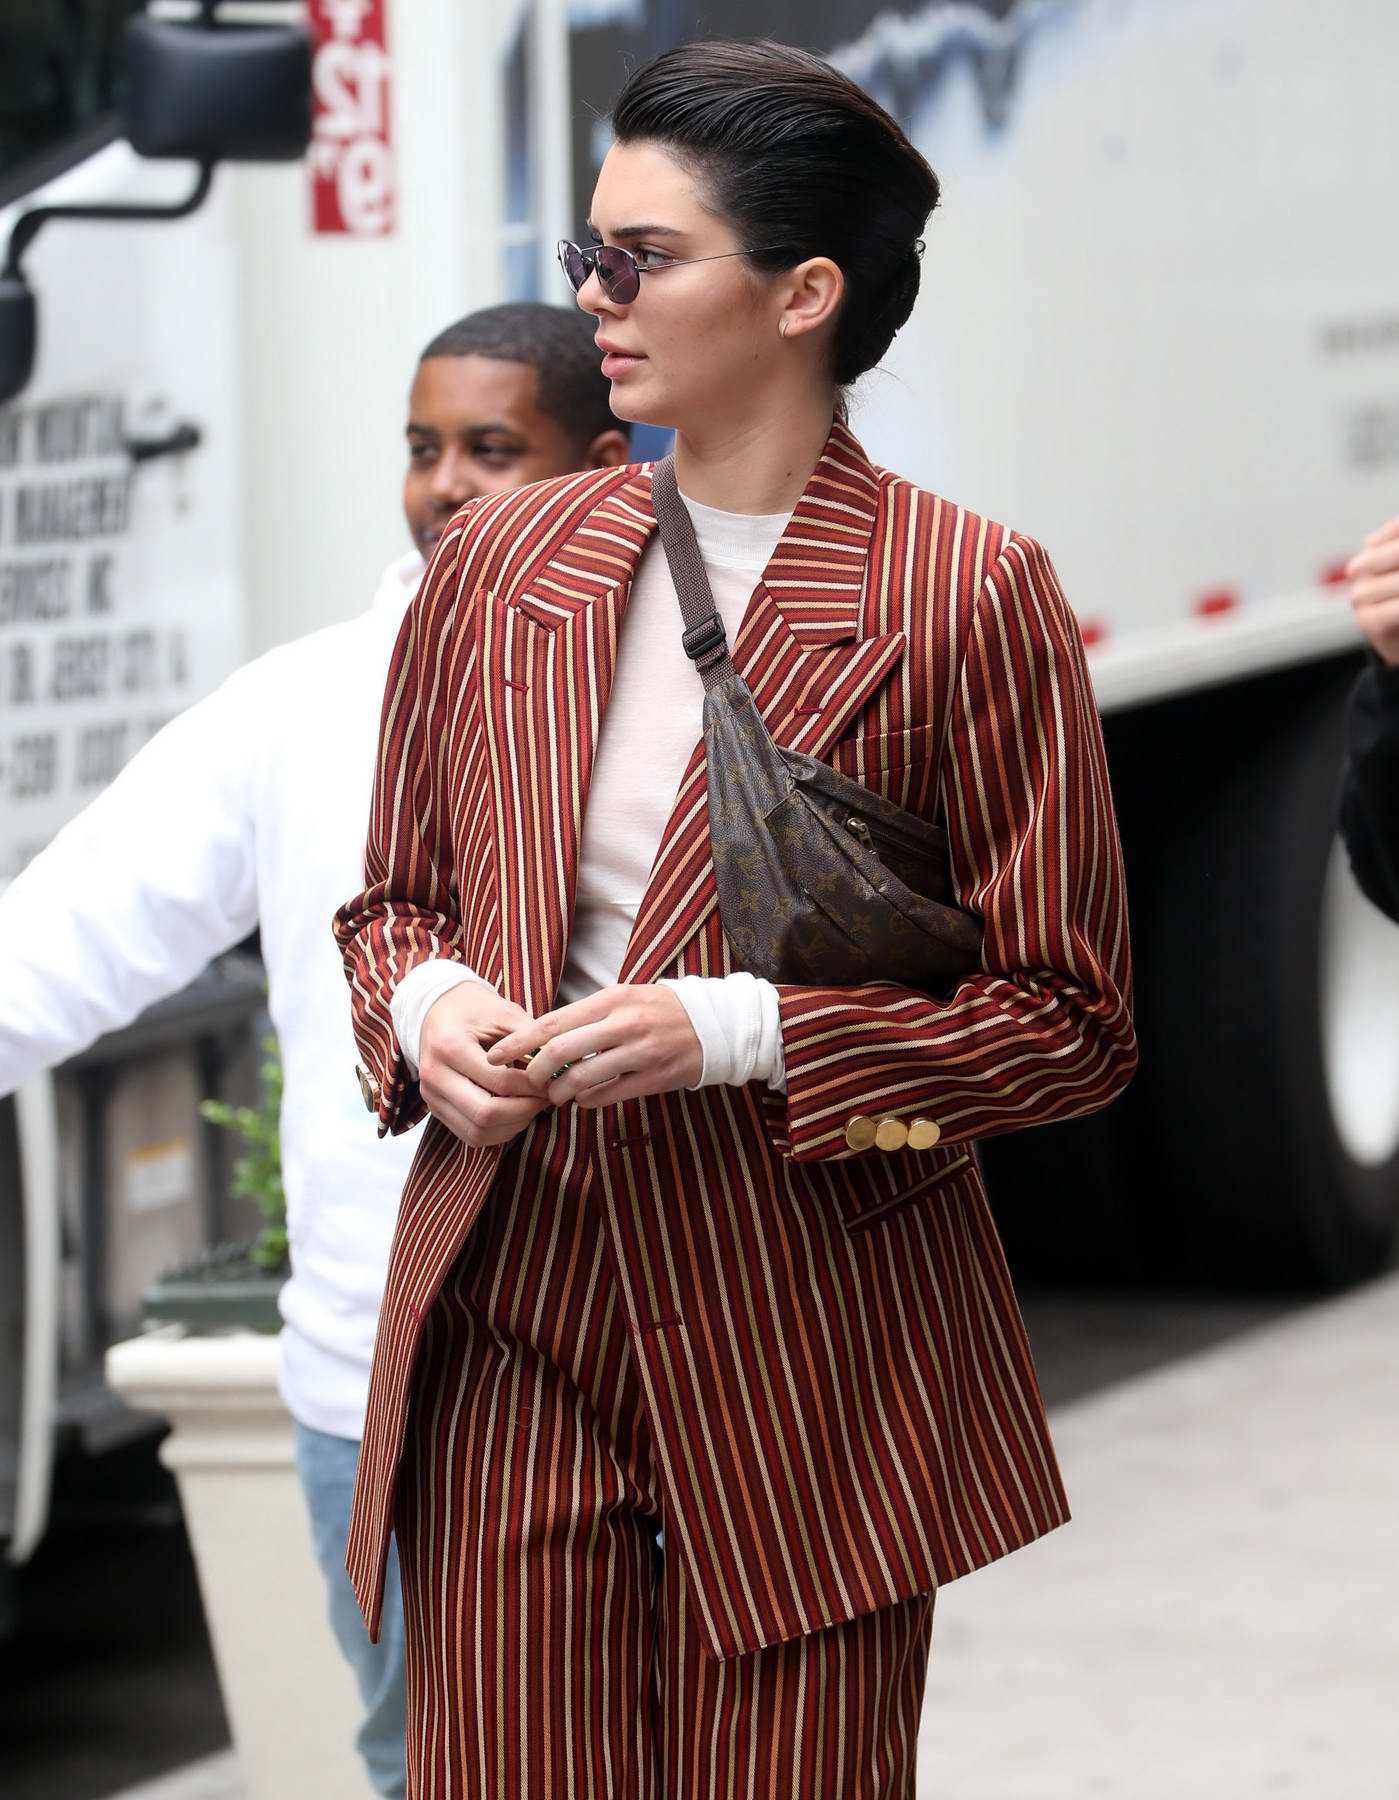 Kendall Jenner in Stripped Suit out and about in New York